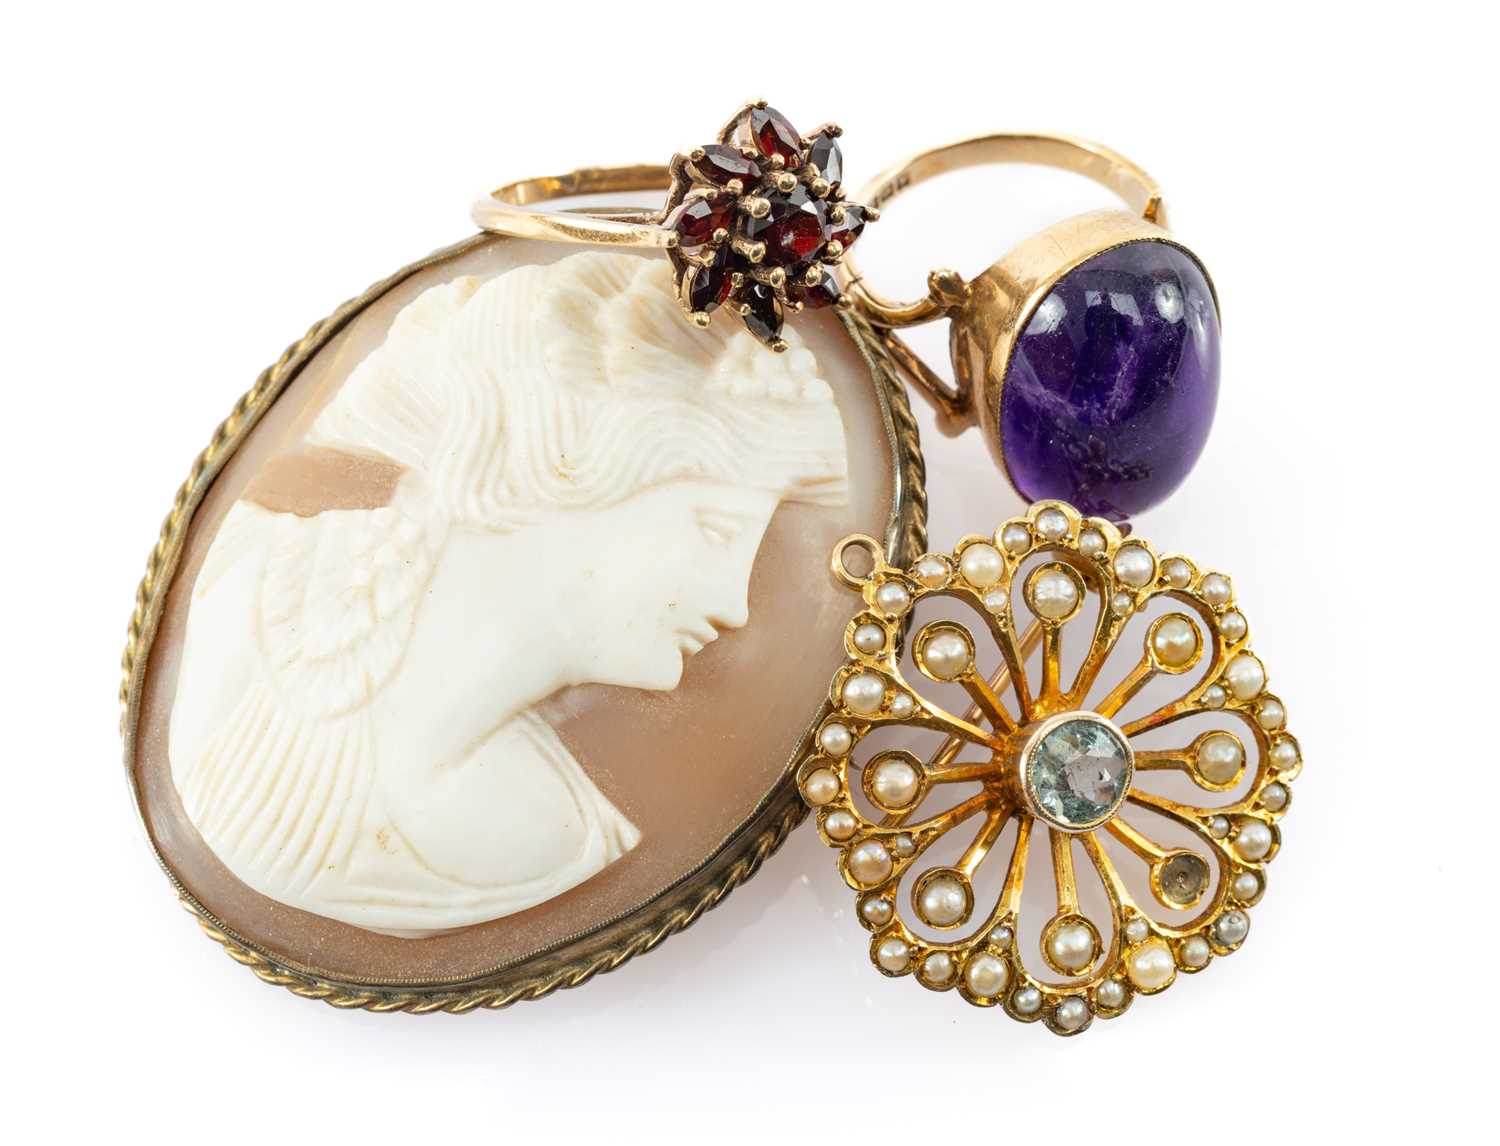 GROUP OF JEWELLERY comprising 9ct gold seed pearl pendant brooch, cameo brooch, 9ct gold amethyst